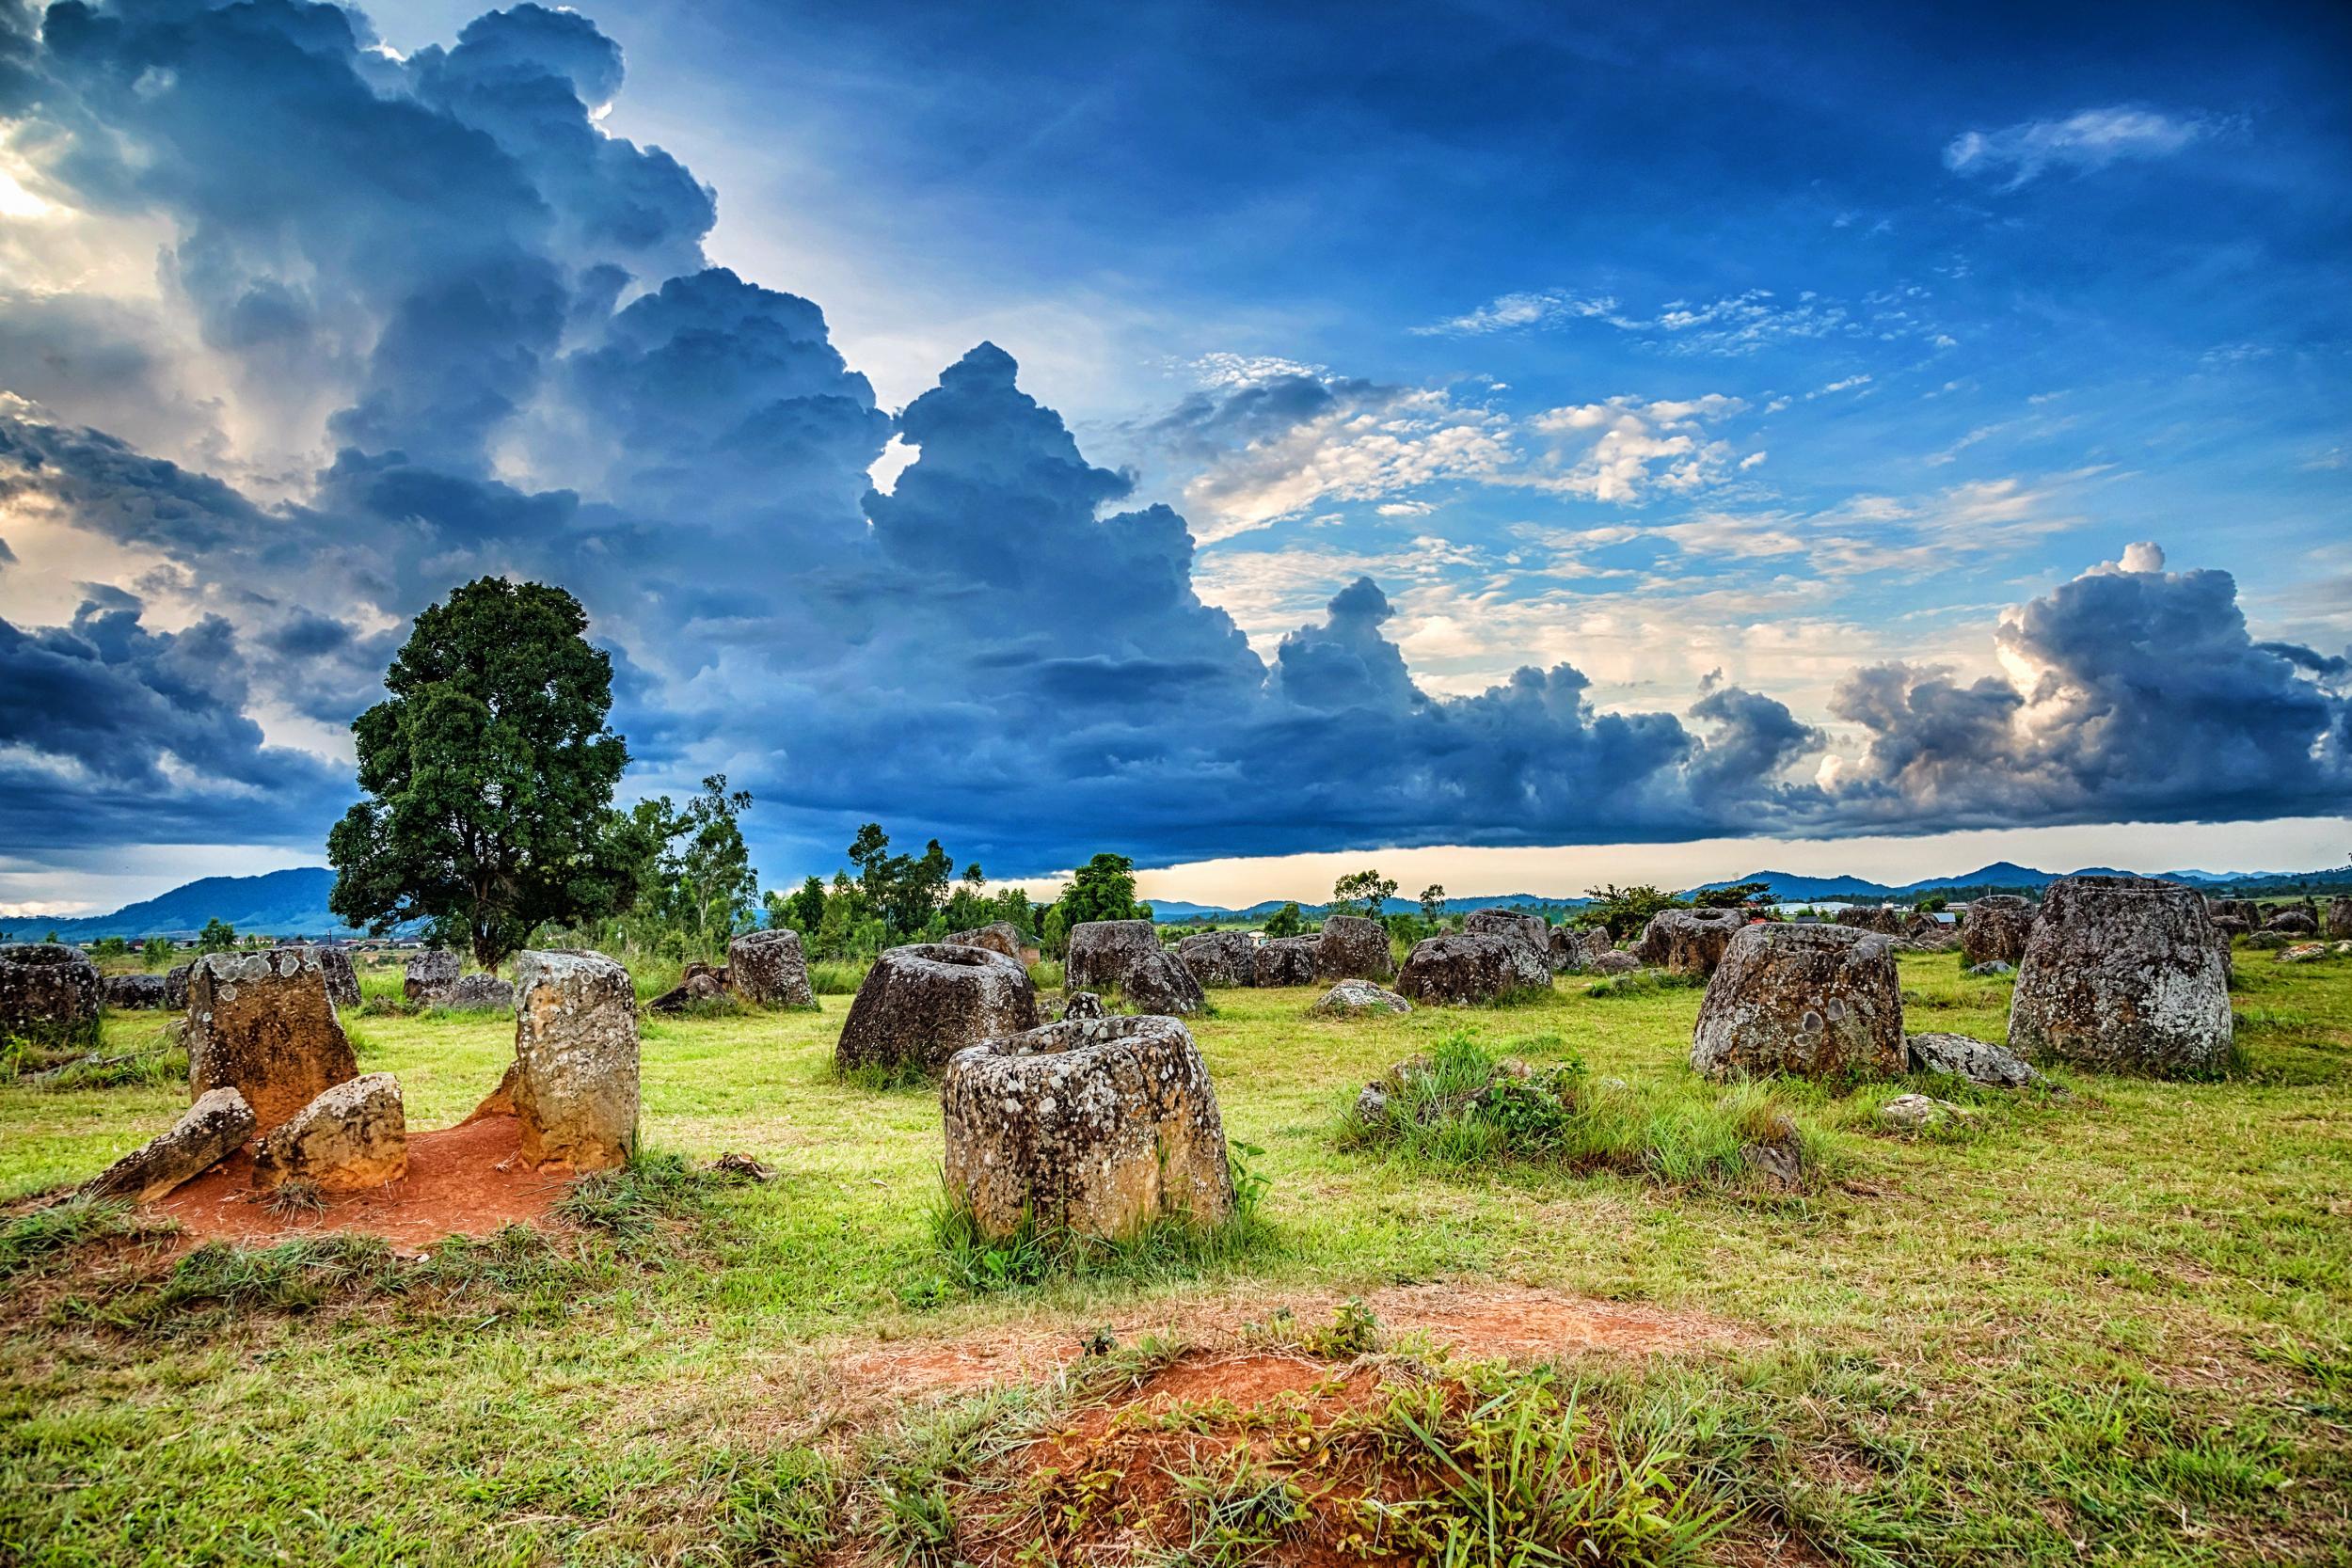 The Plain of Jars is a mysterious archaeological site that's yet to be solved